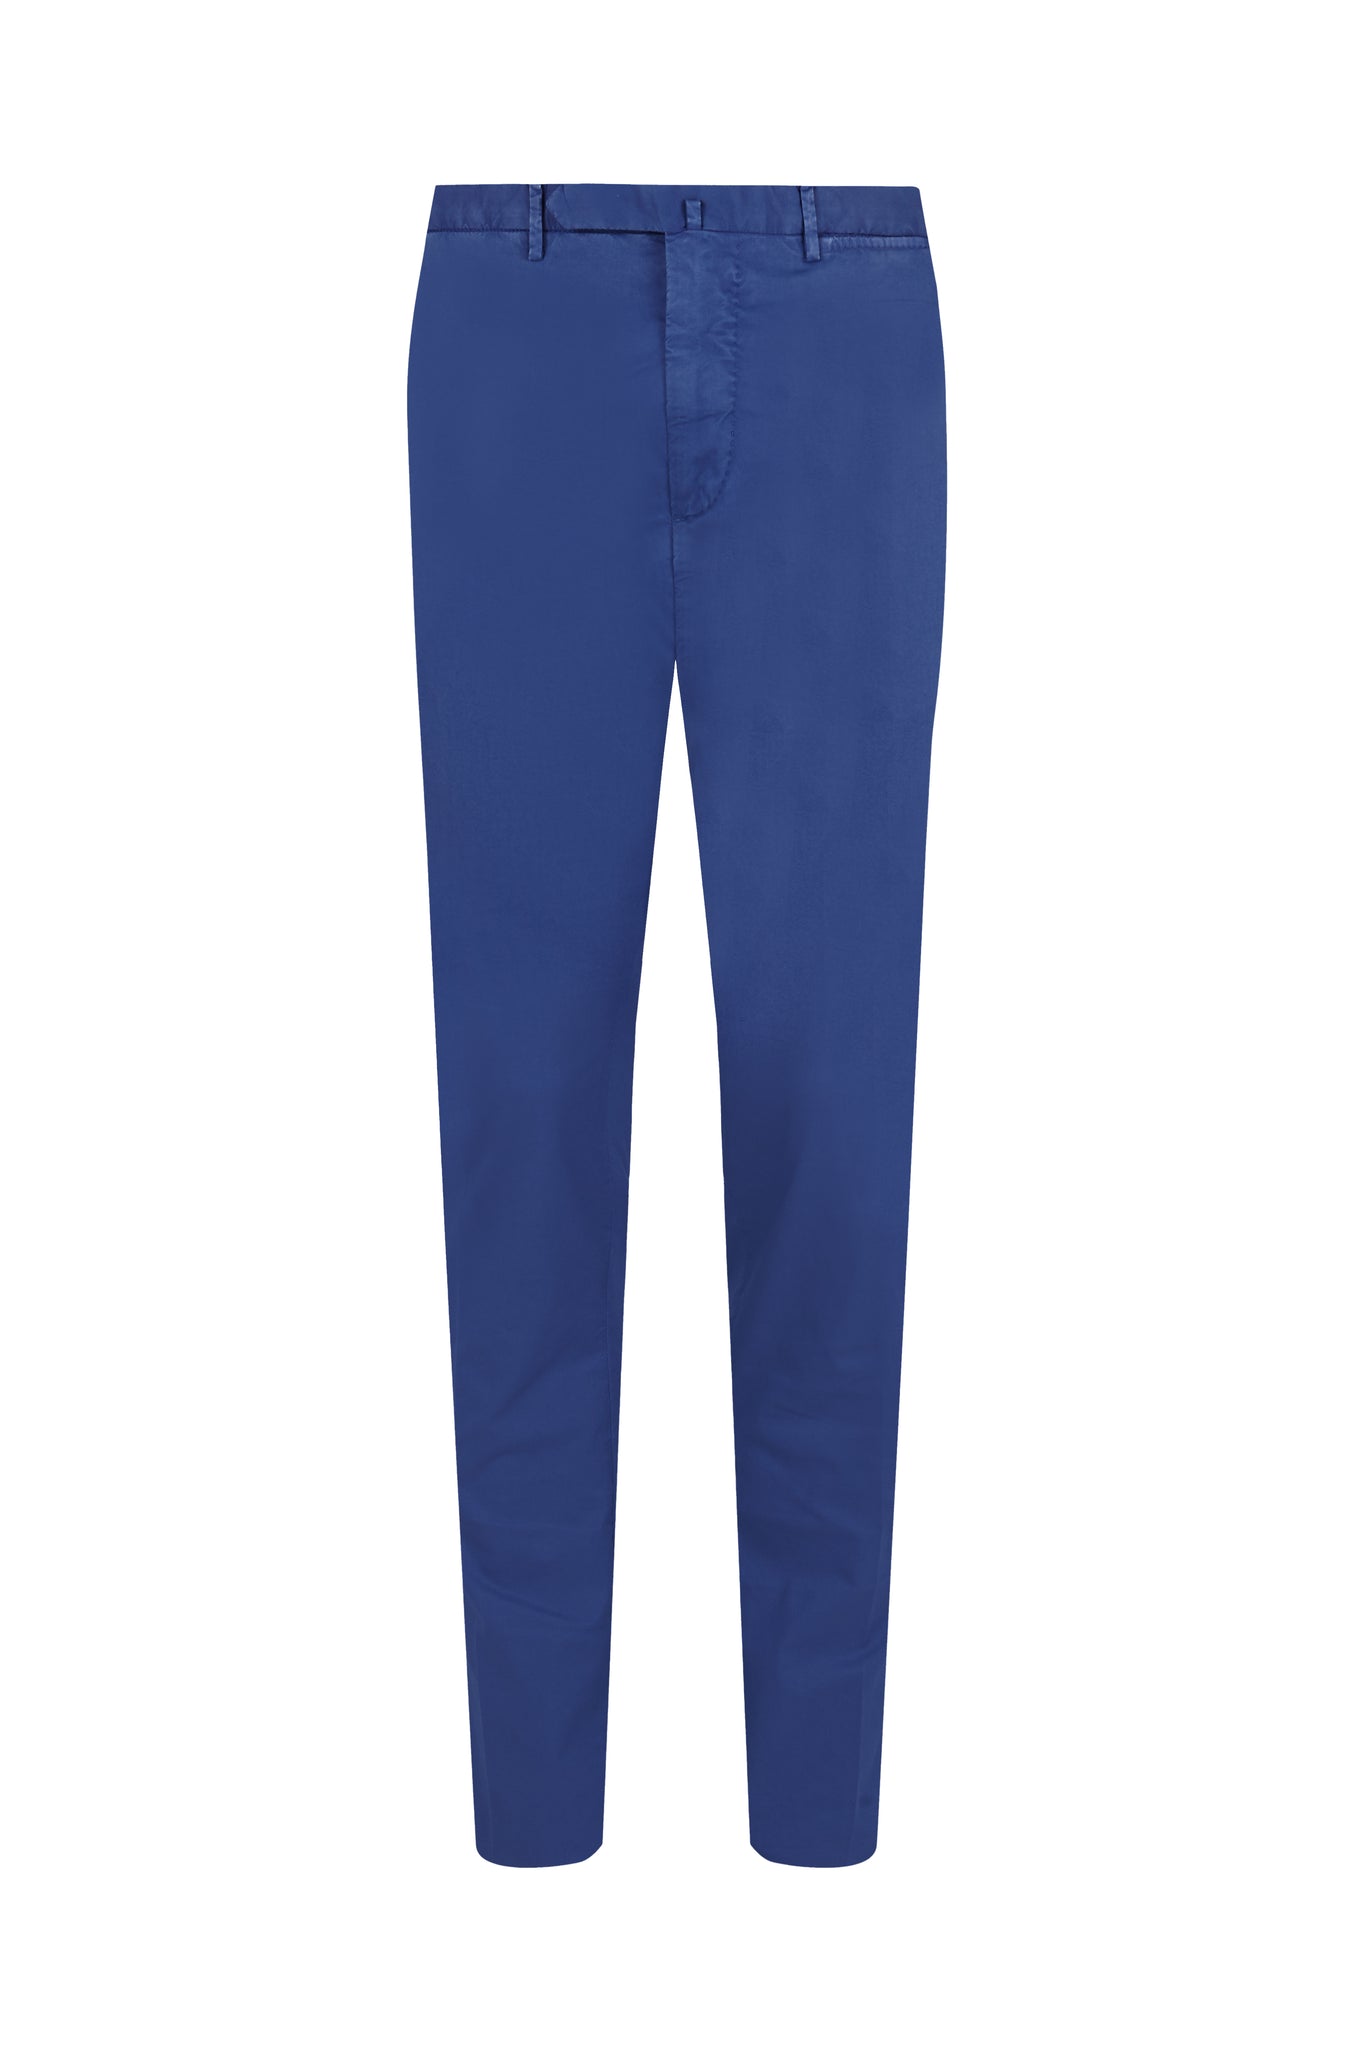 Extralight cotton stretch slim fit trousers